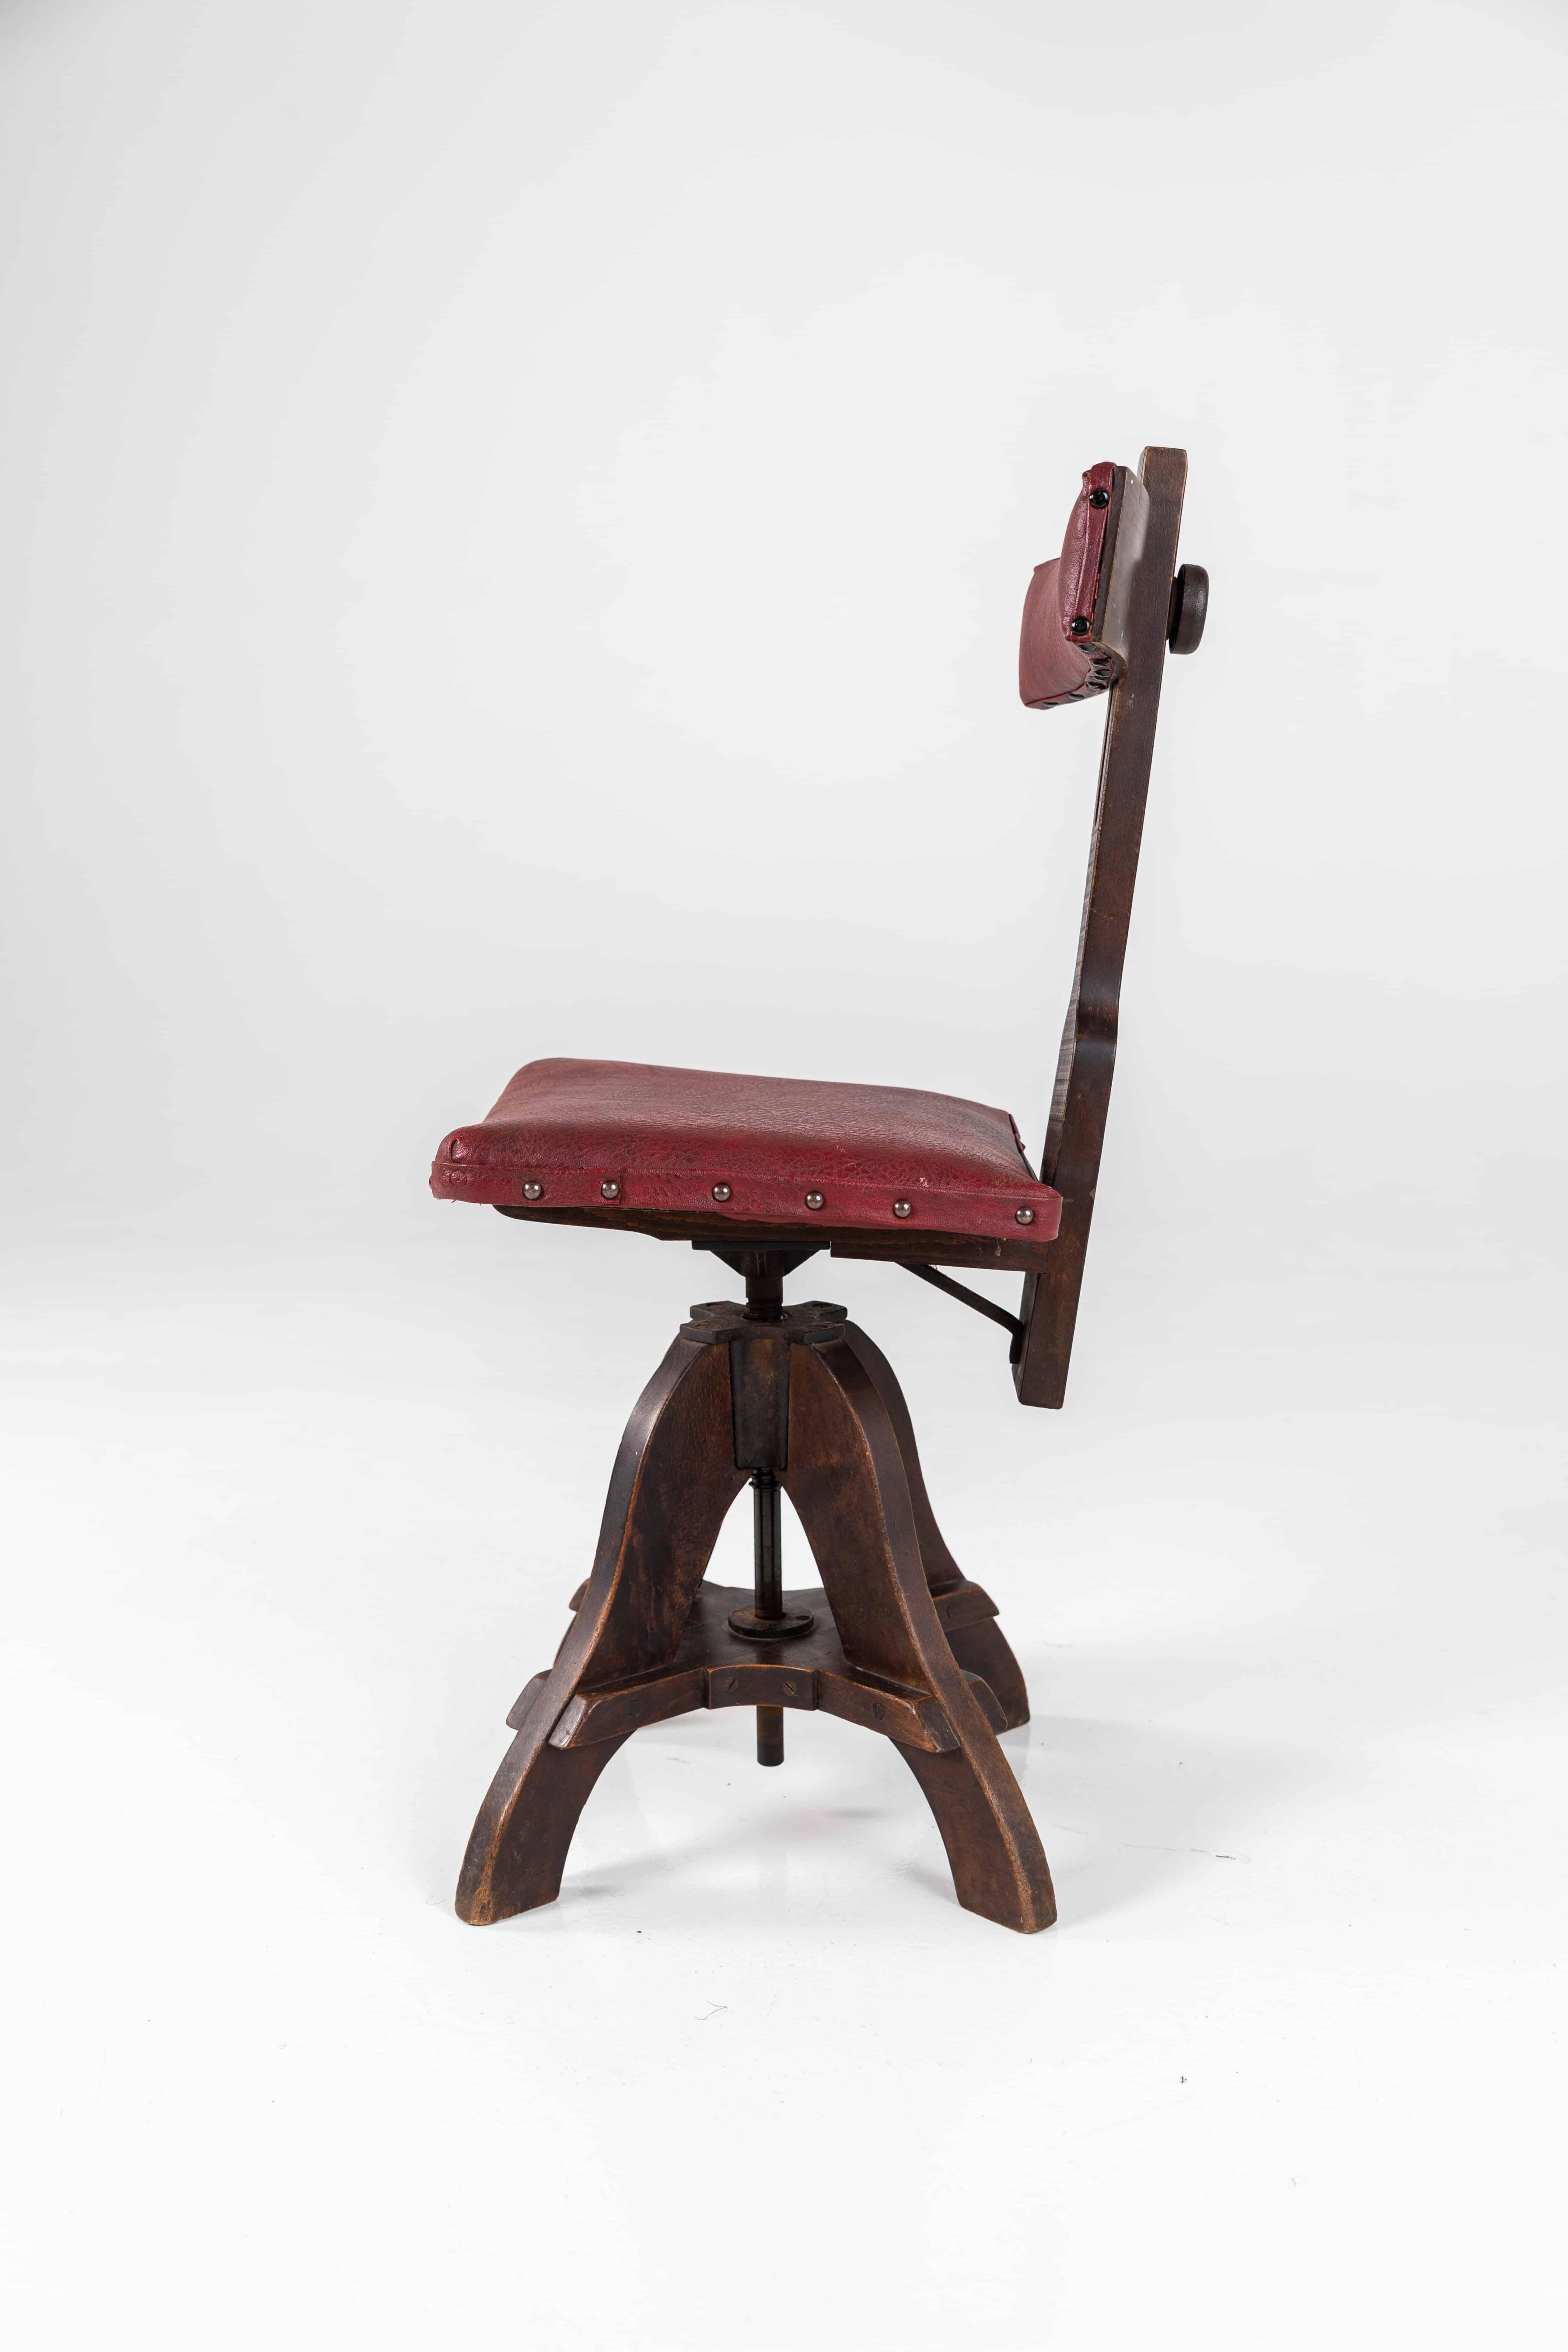 Oak framed draughtsman's chair of exceptional quality manufactured by Glenister’s of High Wycombe. c.1880

Height adjustable on threaded rod, along with back rest. Later leatherette covering, with original oil cloth beneath and horse hair padding.